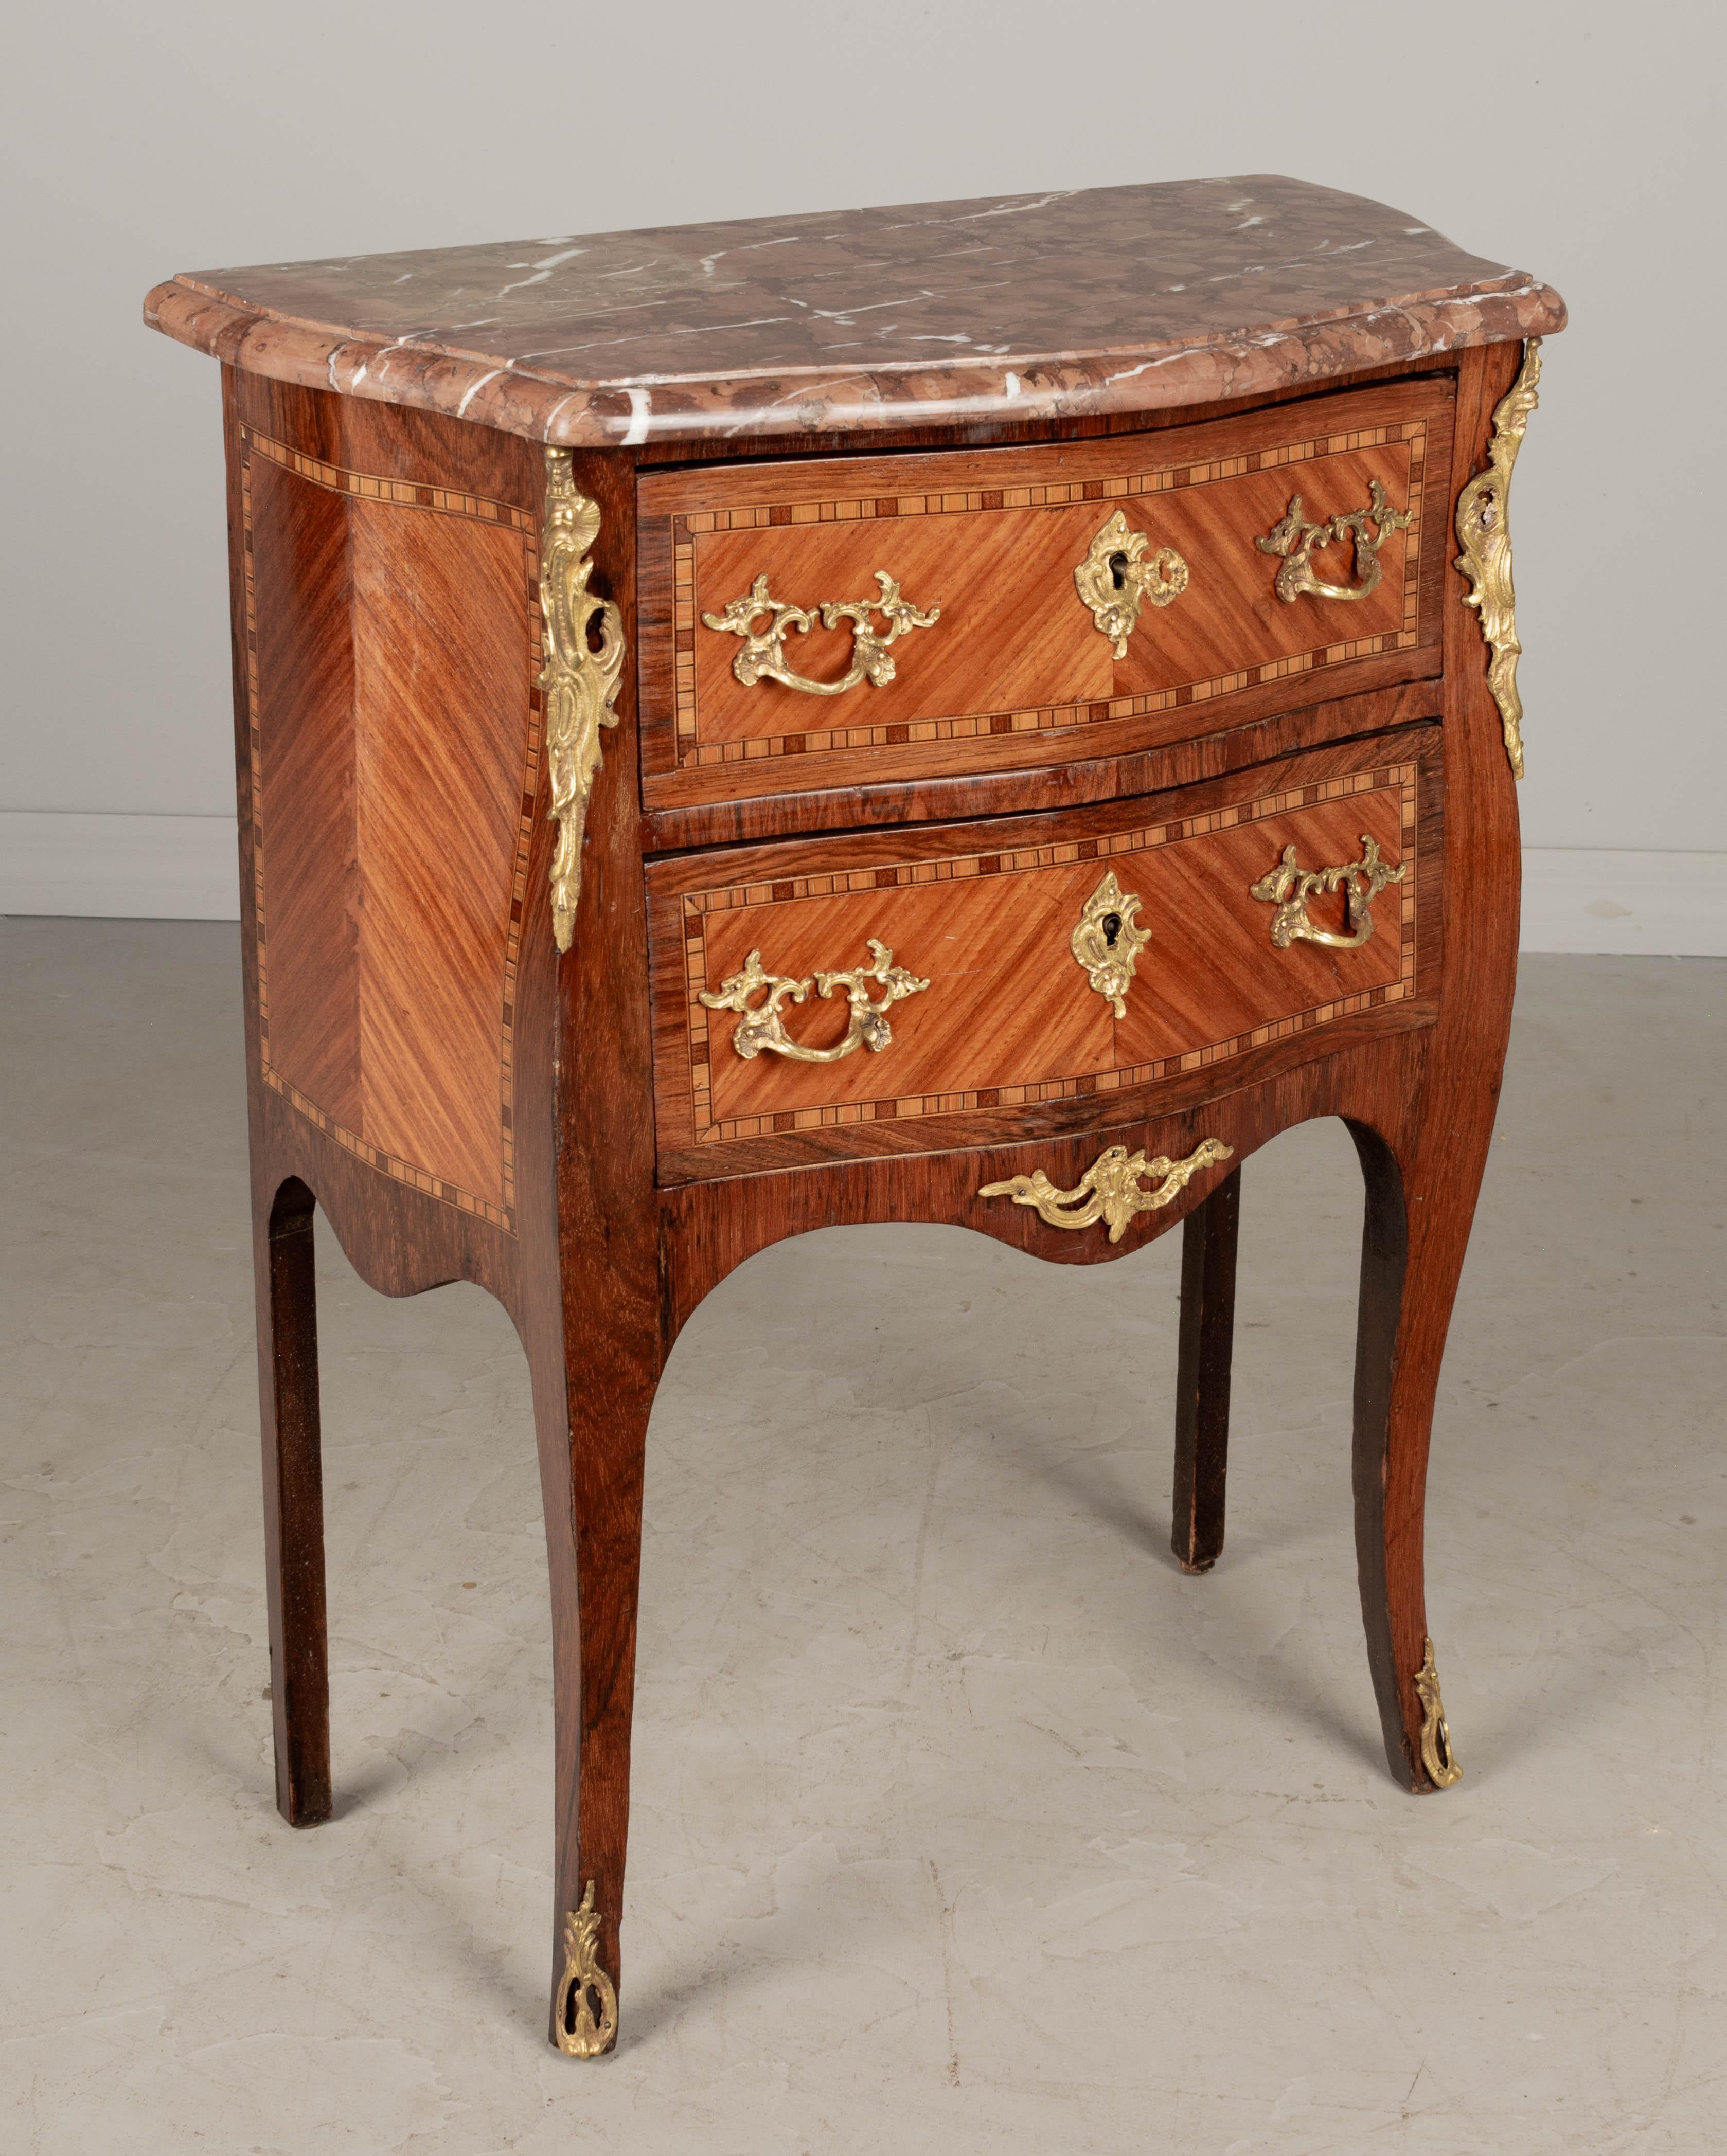 An early 20th century French Louis XV style bronze mounted marble top marquetry commode, finely crafted of solid mahogany with inlaid veneers of walnut, mahogany and various exotic woods. Elegant serpentine form and slender cabriole legs. French